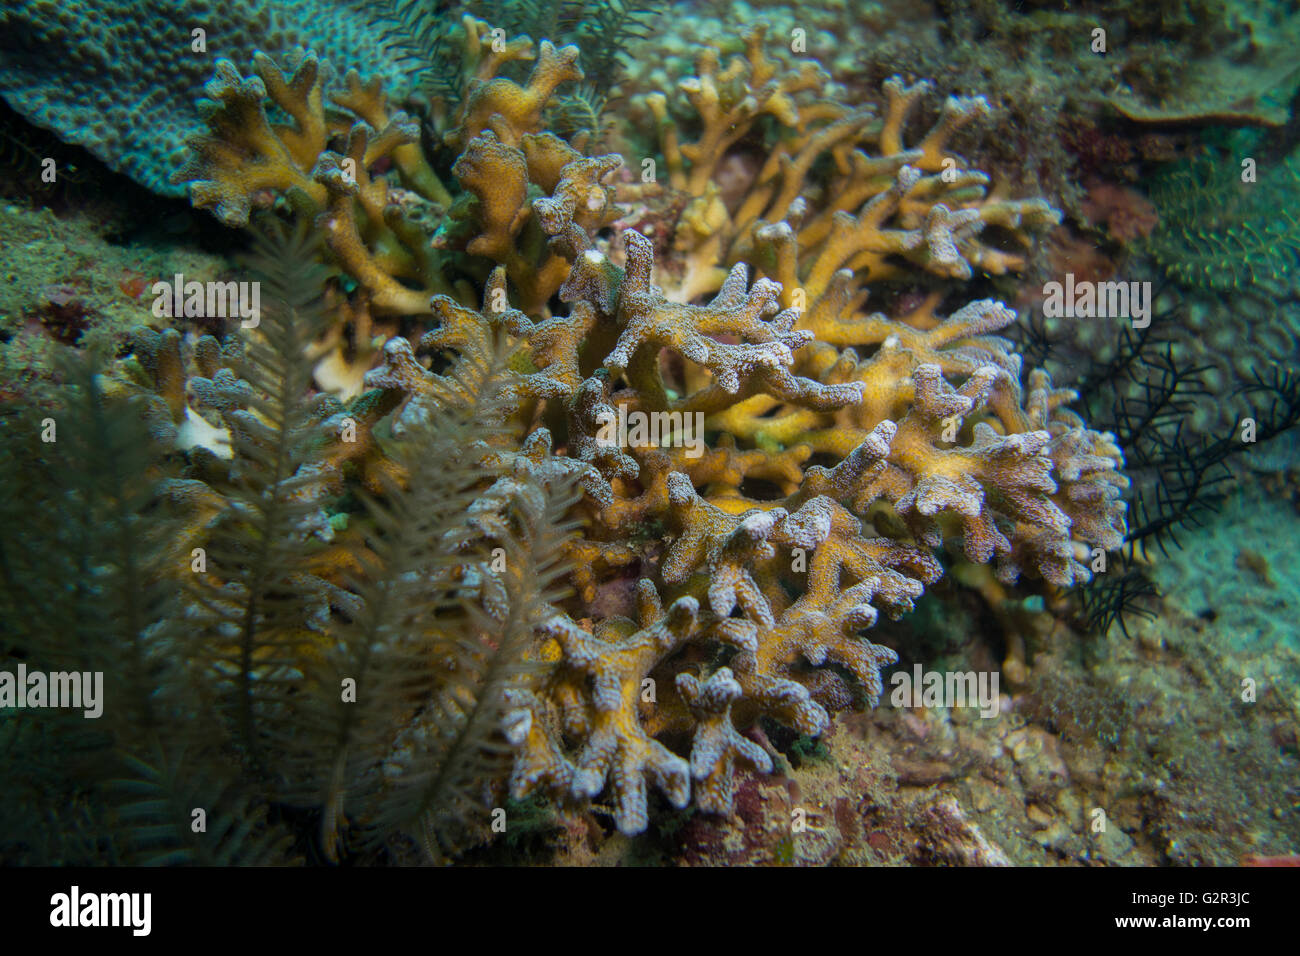 Stony coral form the coral triangle, Brunei Darussalam. Stock Photo